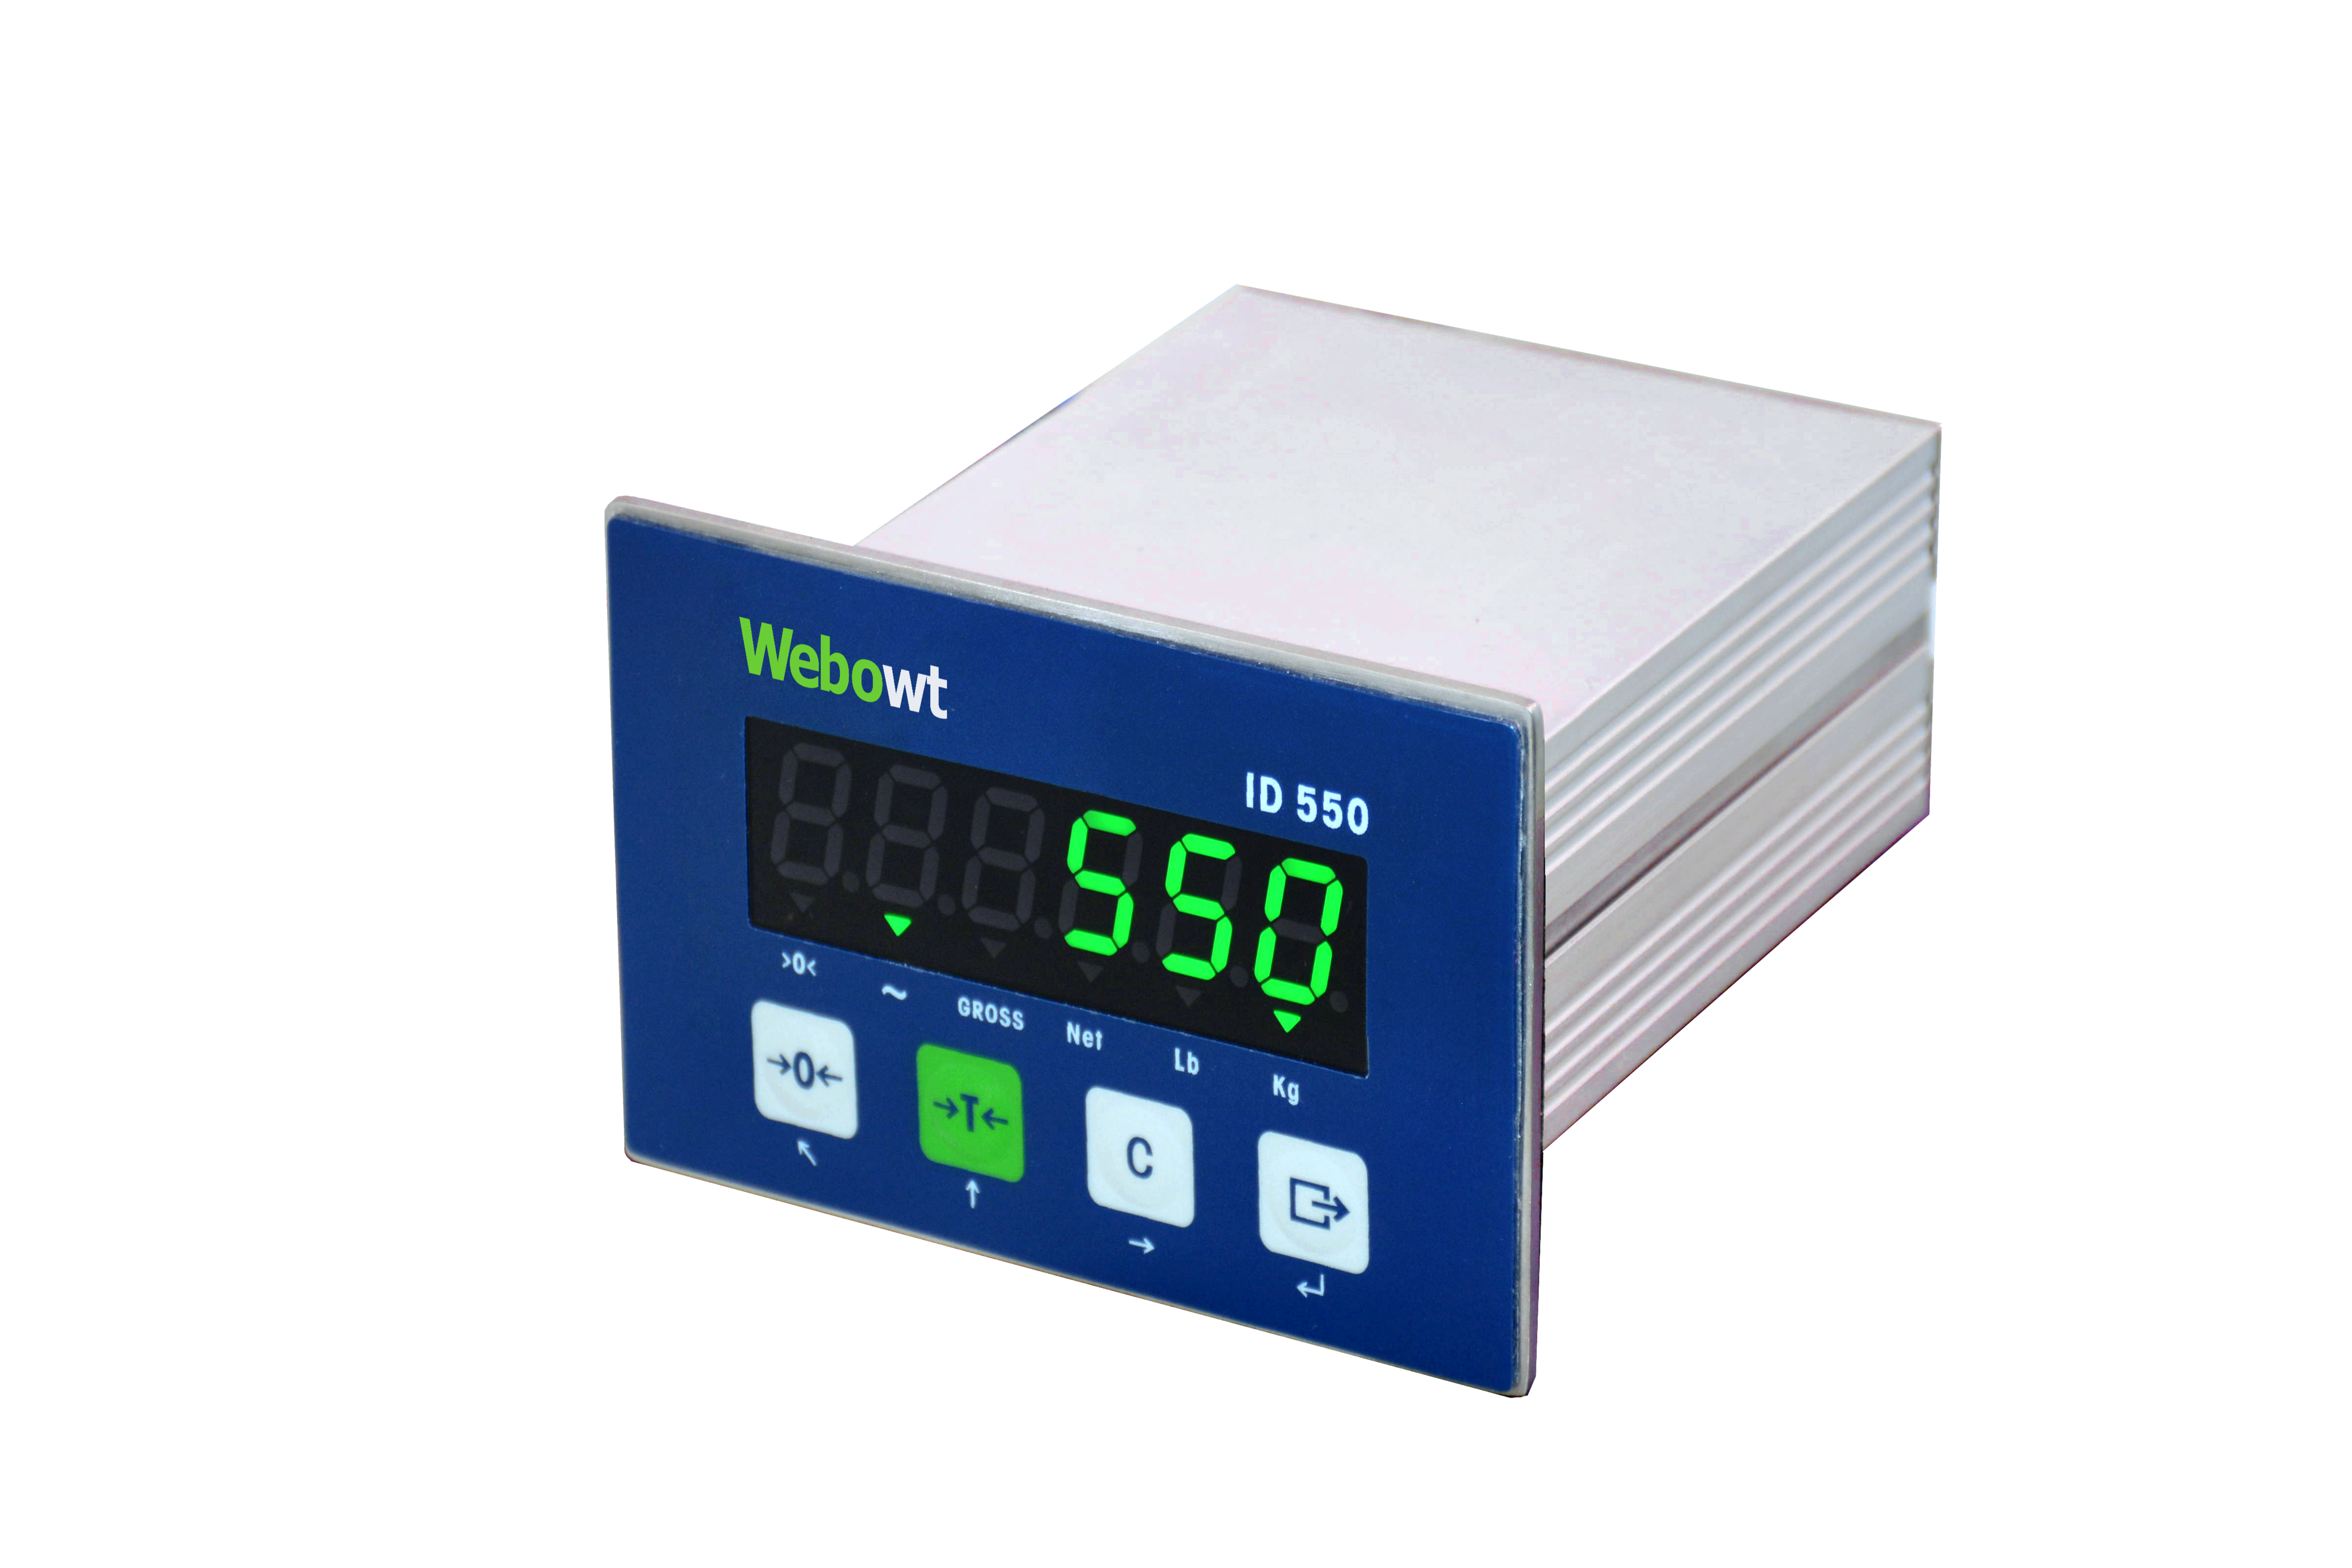 Order No. 8550004, Model No.:ID550P00R00D, ID550, Panel, Green LED, 1 Serial port(RS232/485), MODBUS-RTU, Input x 4/ Relay Output x 6, Universal constant controll software, 24VDC